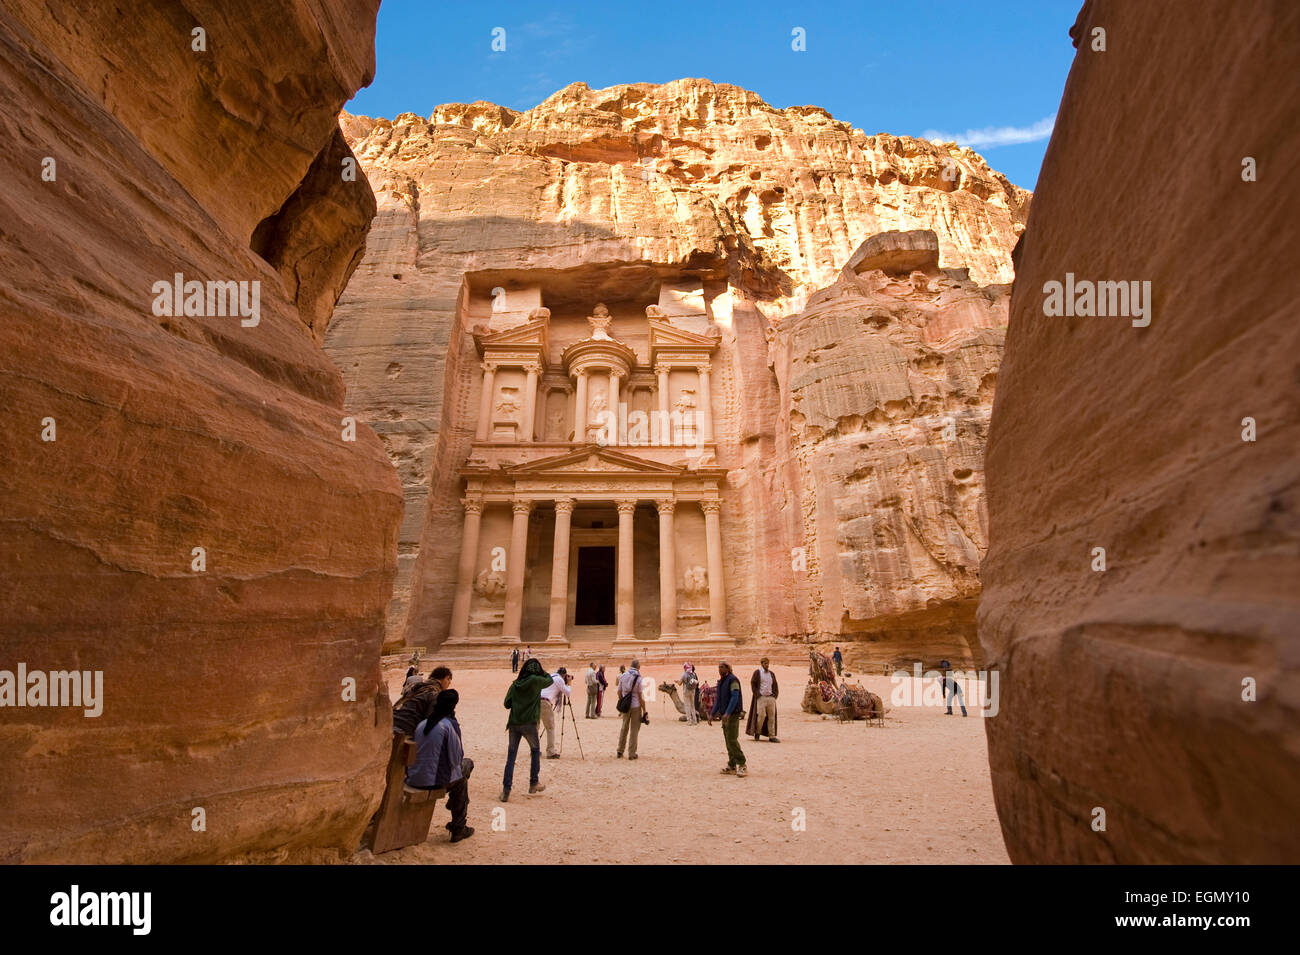 The treasury is also called Al Khazna, it is the most magnificant and famous facade in Petra Jordan Stock Photo